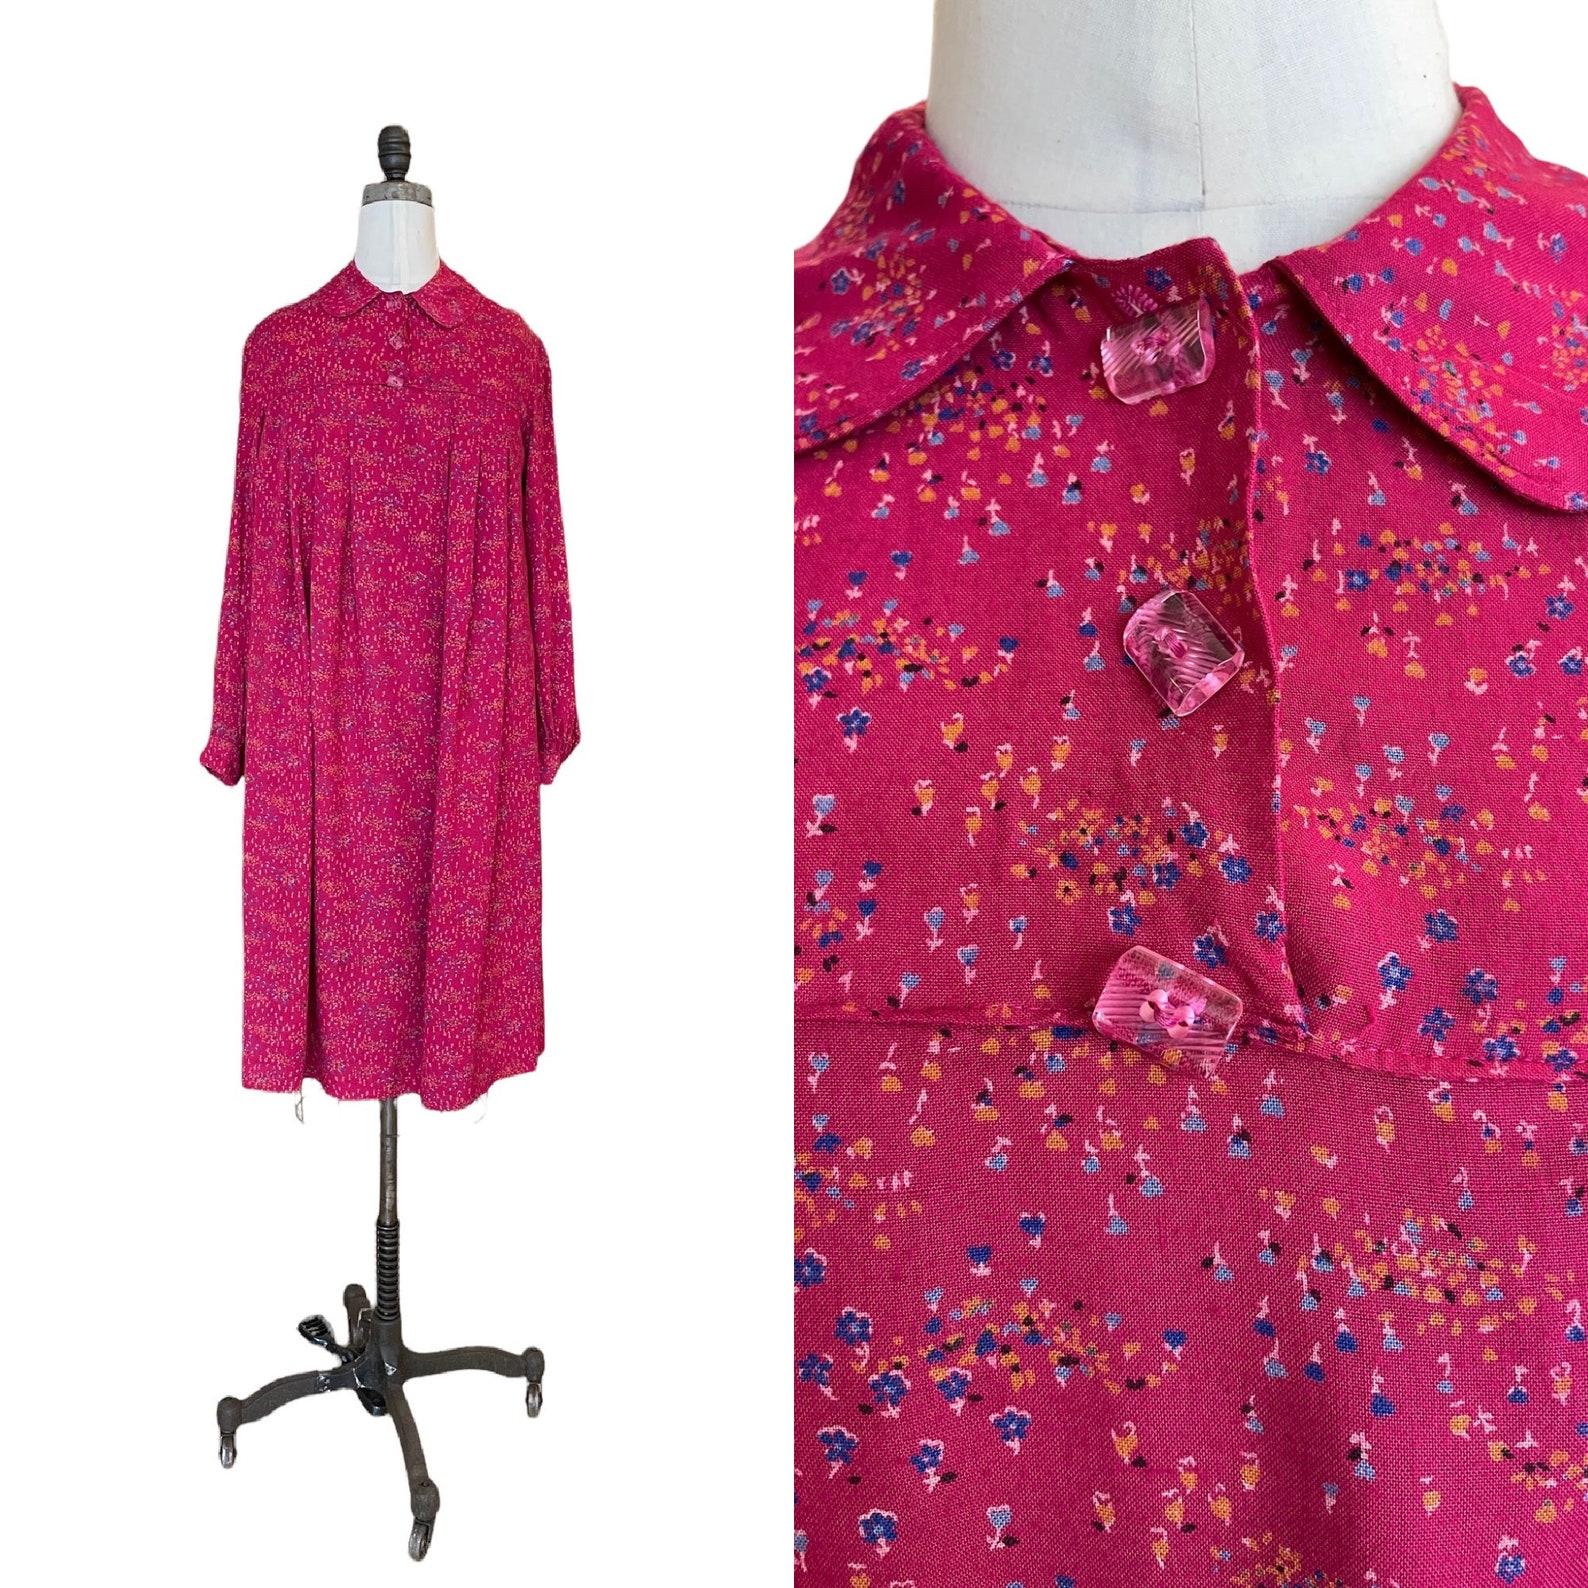 ❉ vintage raspberry pink dress
❉ trapeze silhouette
❉ ditsy floral print
❉ Peter Pan collar
❉ 3 button closure yoke
❉ long sleeves
❉ dress is lined

Circa Late 1970s - Early 1980s
Origin: France
Raspberry Pink
No Content Label
Excellent